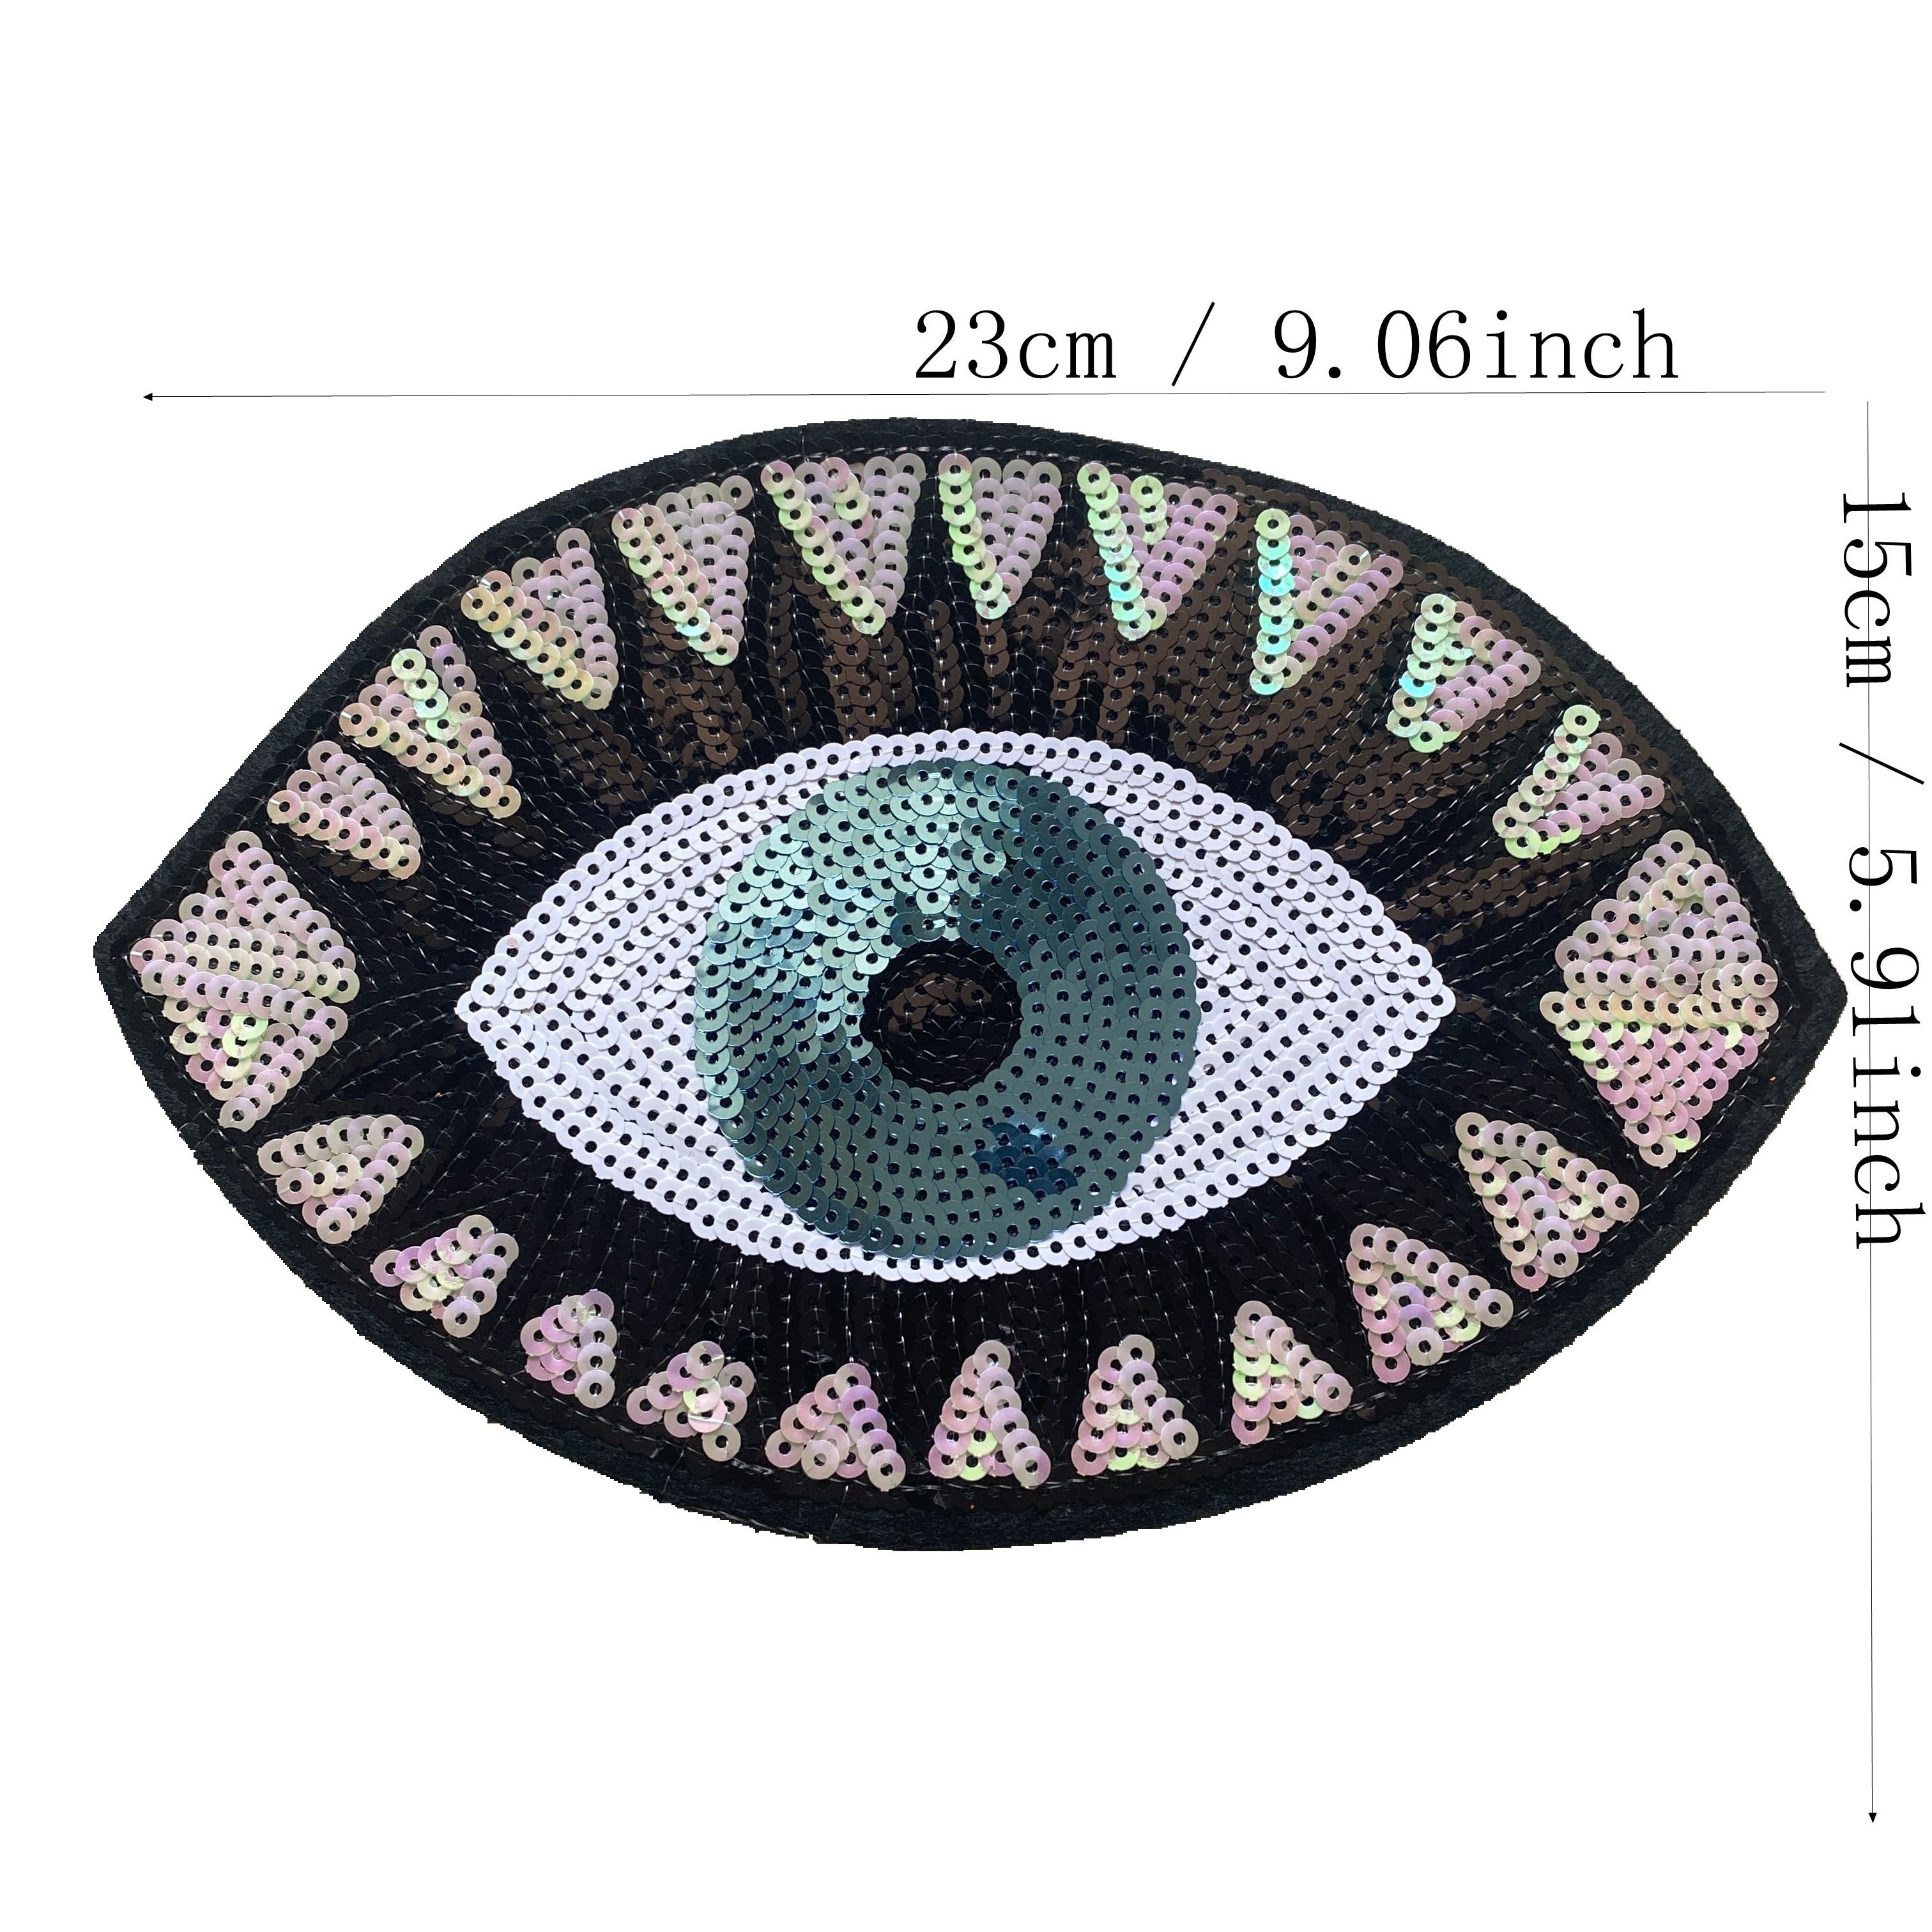 Hand of Evil Eye Patch for Adults - Embroidery Patch Decorative Sequin Iron on Patches Iron on or Sew on Patches Large Patches for Jackets - Sequin